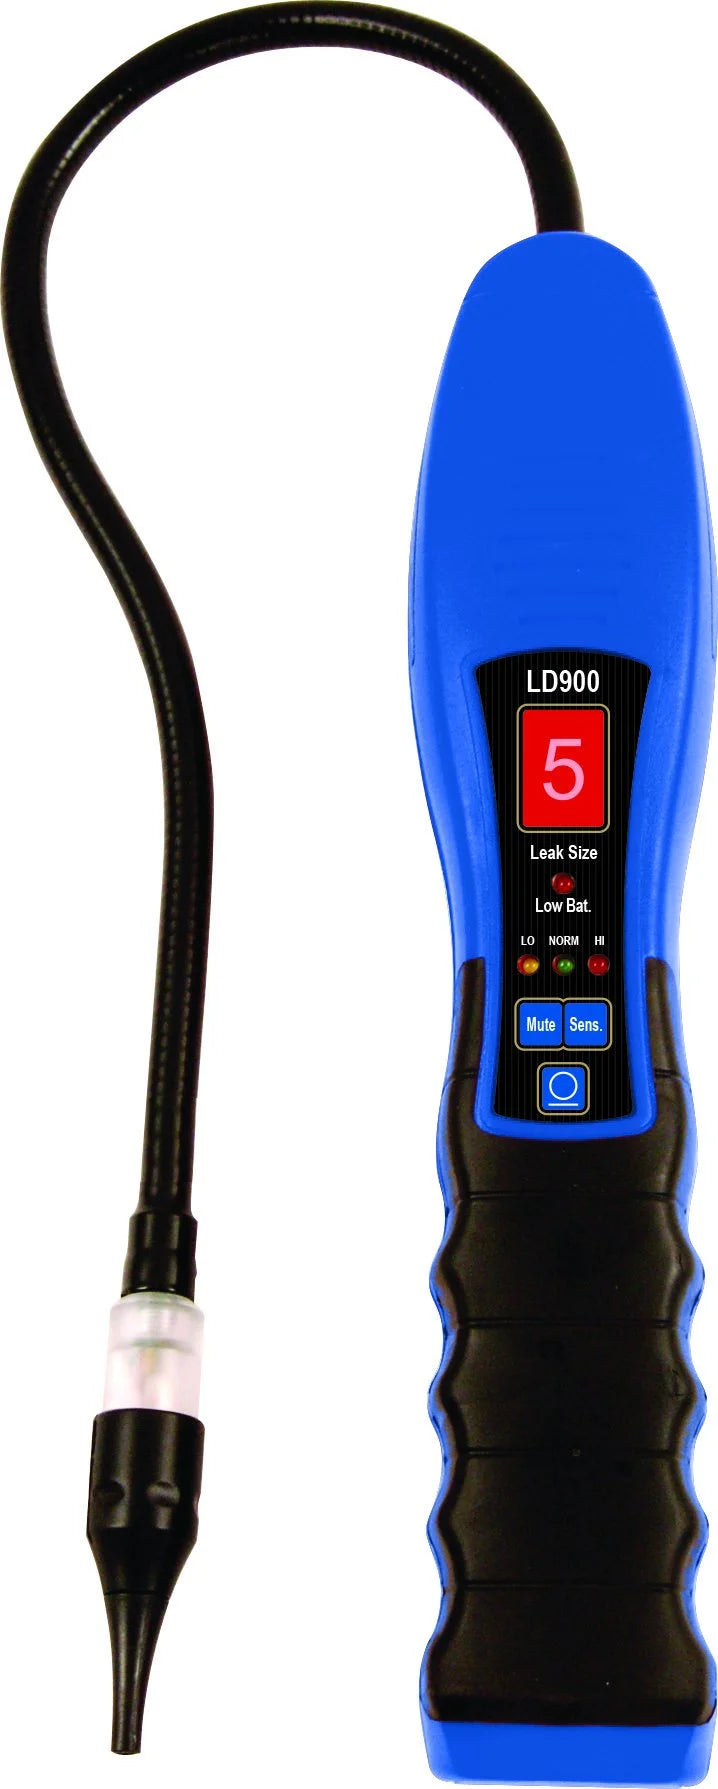 Imperial Tool Gas Leak Detector for All Combustible Gases Including Methane (Natural Gas), Propane, Butane, Ethane, Acetylene, Methanol, Acetone, and Gasoline